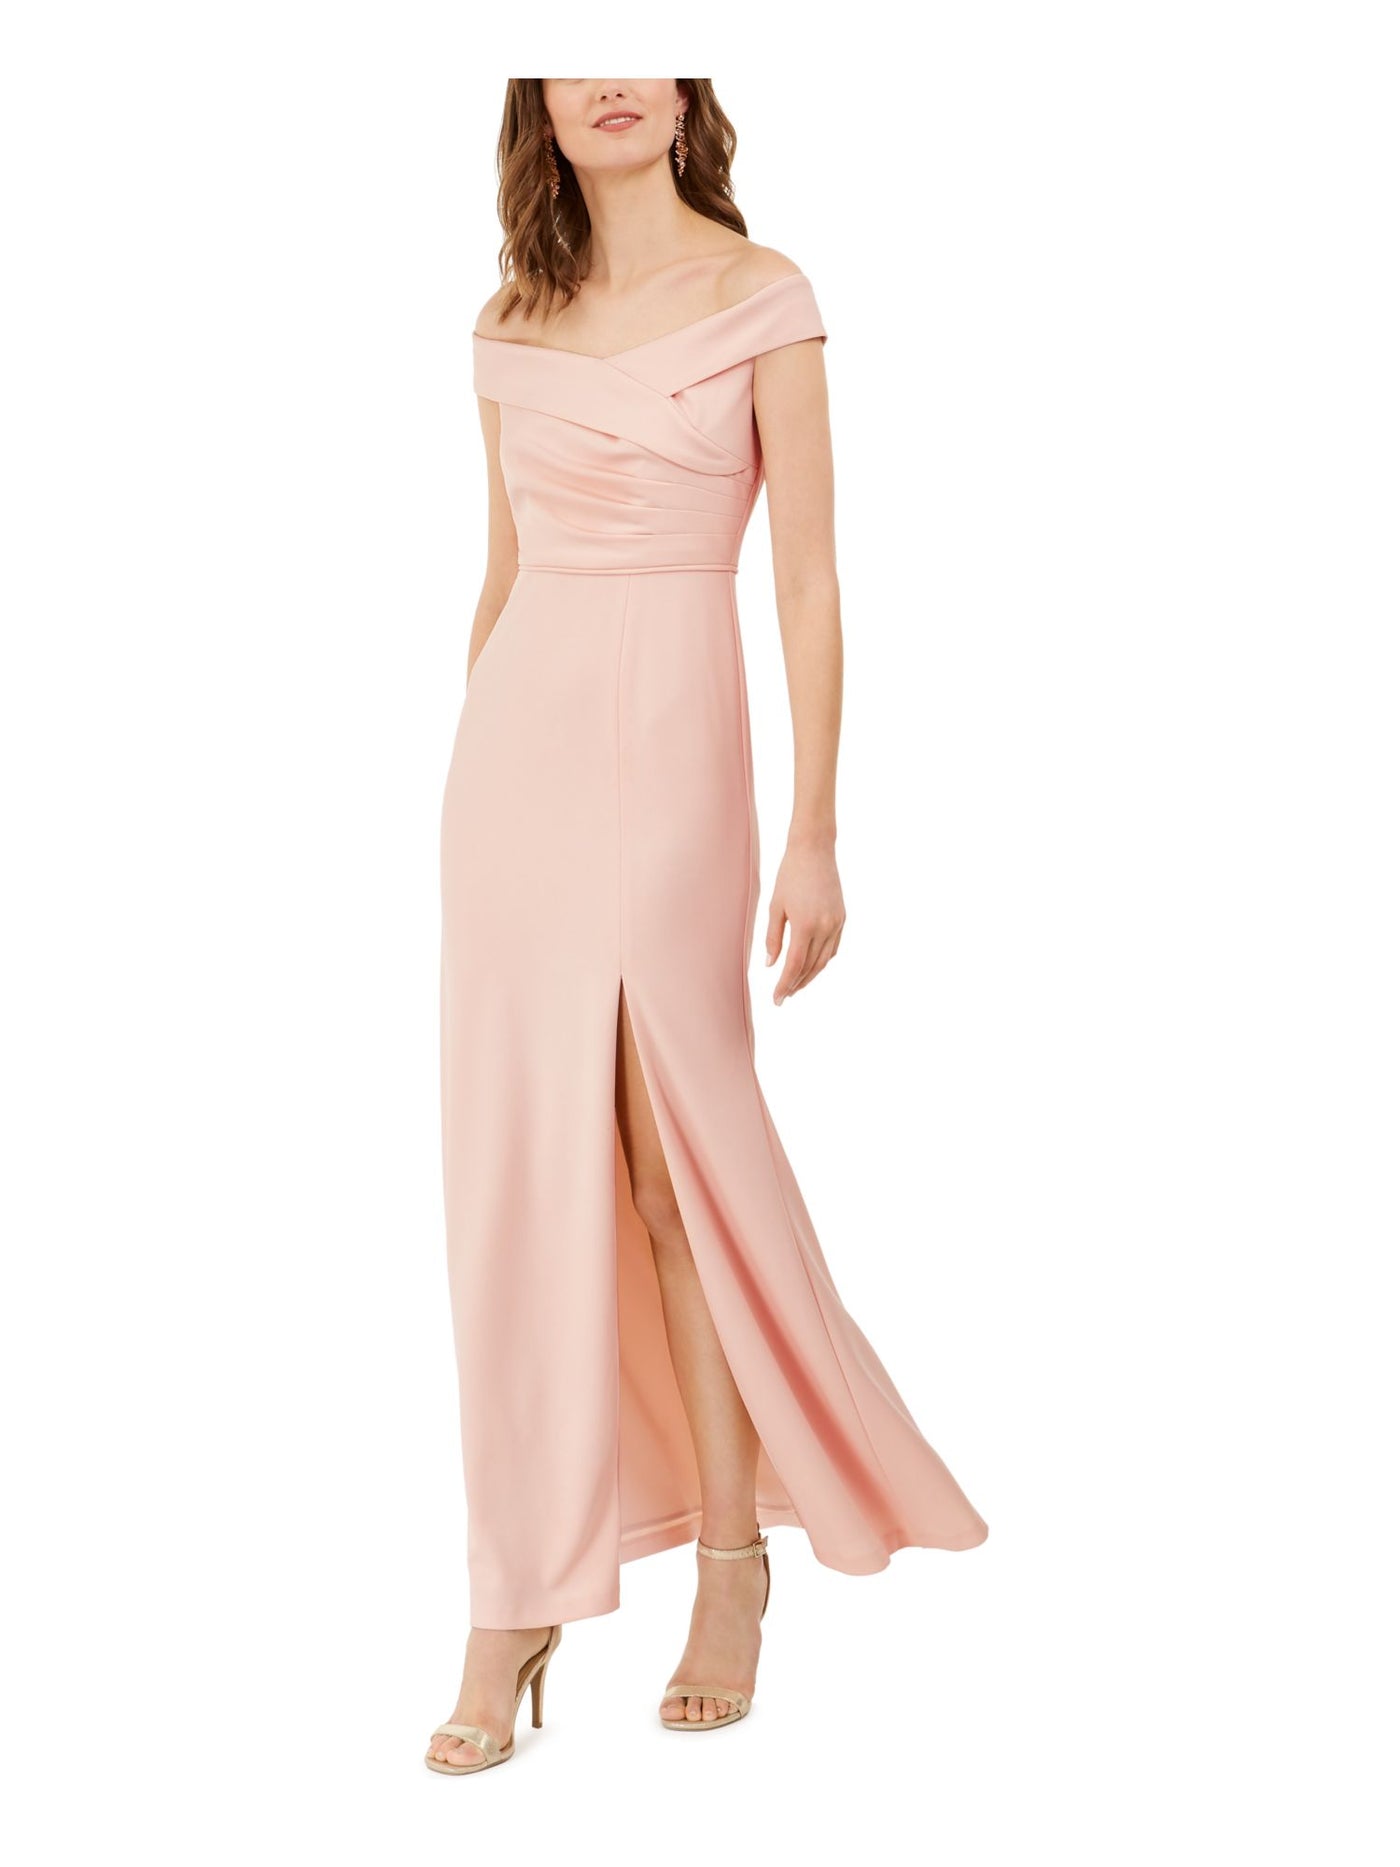 ADRIANNA PAPELL Womens Pink Slitted Off Shoulder Full-Length Evening Sheath Dress 2